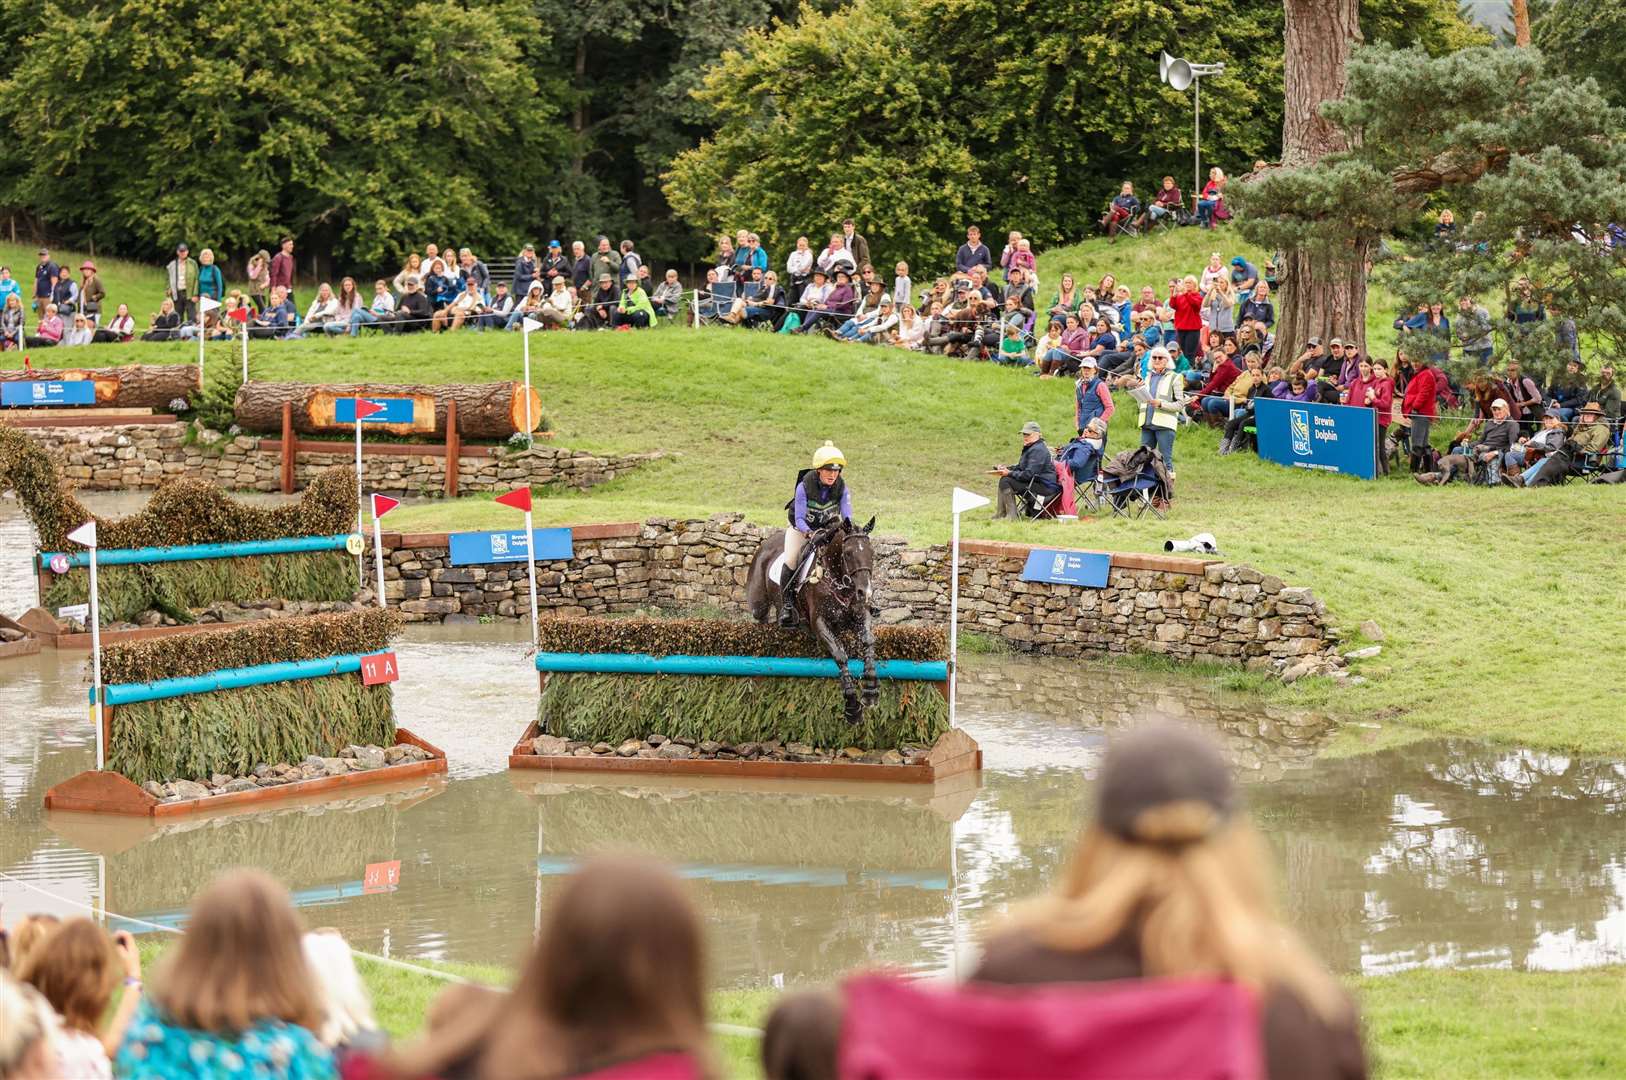 The 35th Blair Horse Trials wil be the last to be held.